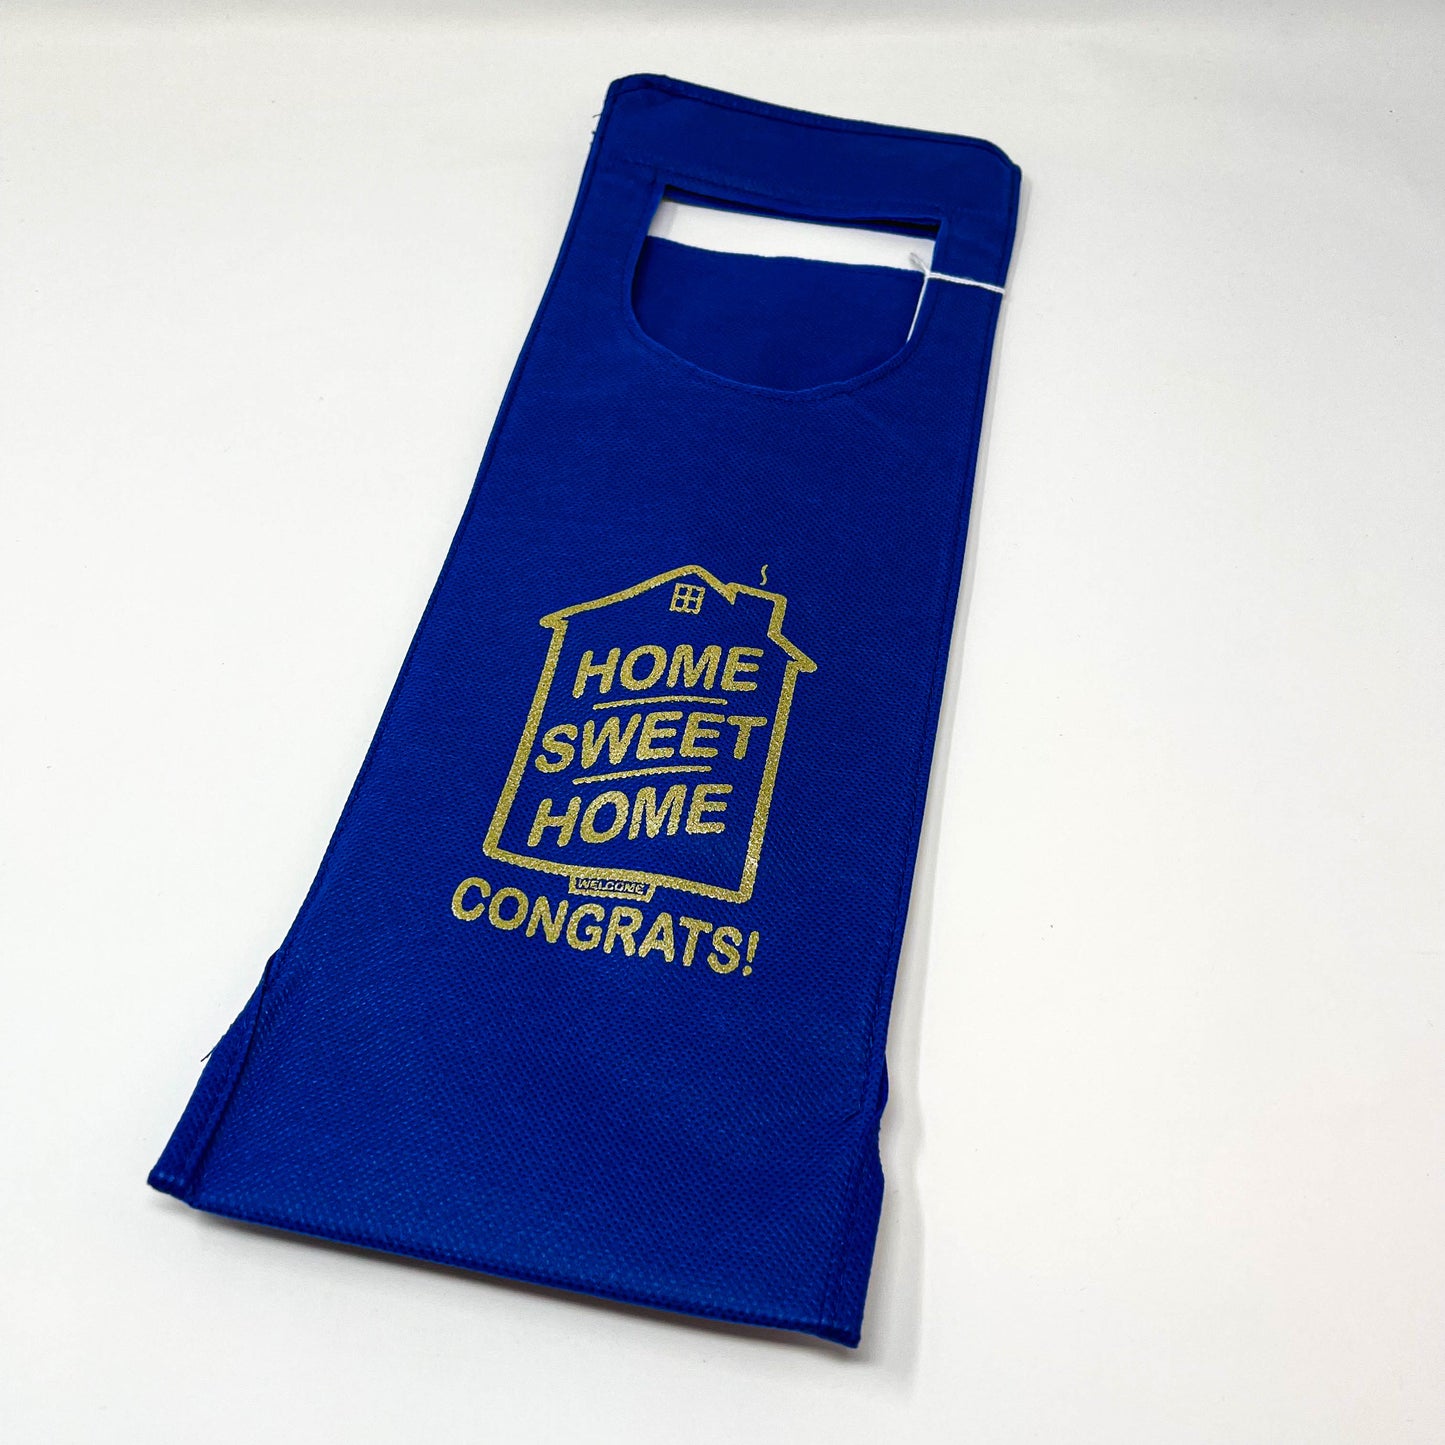 Wine Bag Home Sweet Home - Congrats Assorted Colors (WINEB WINEM WINEN WINER)